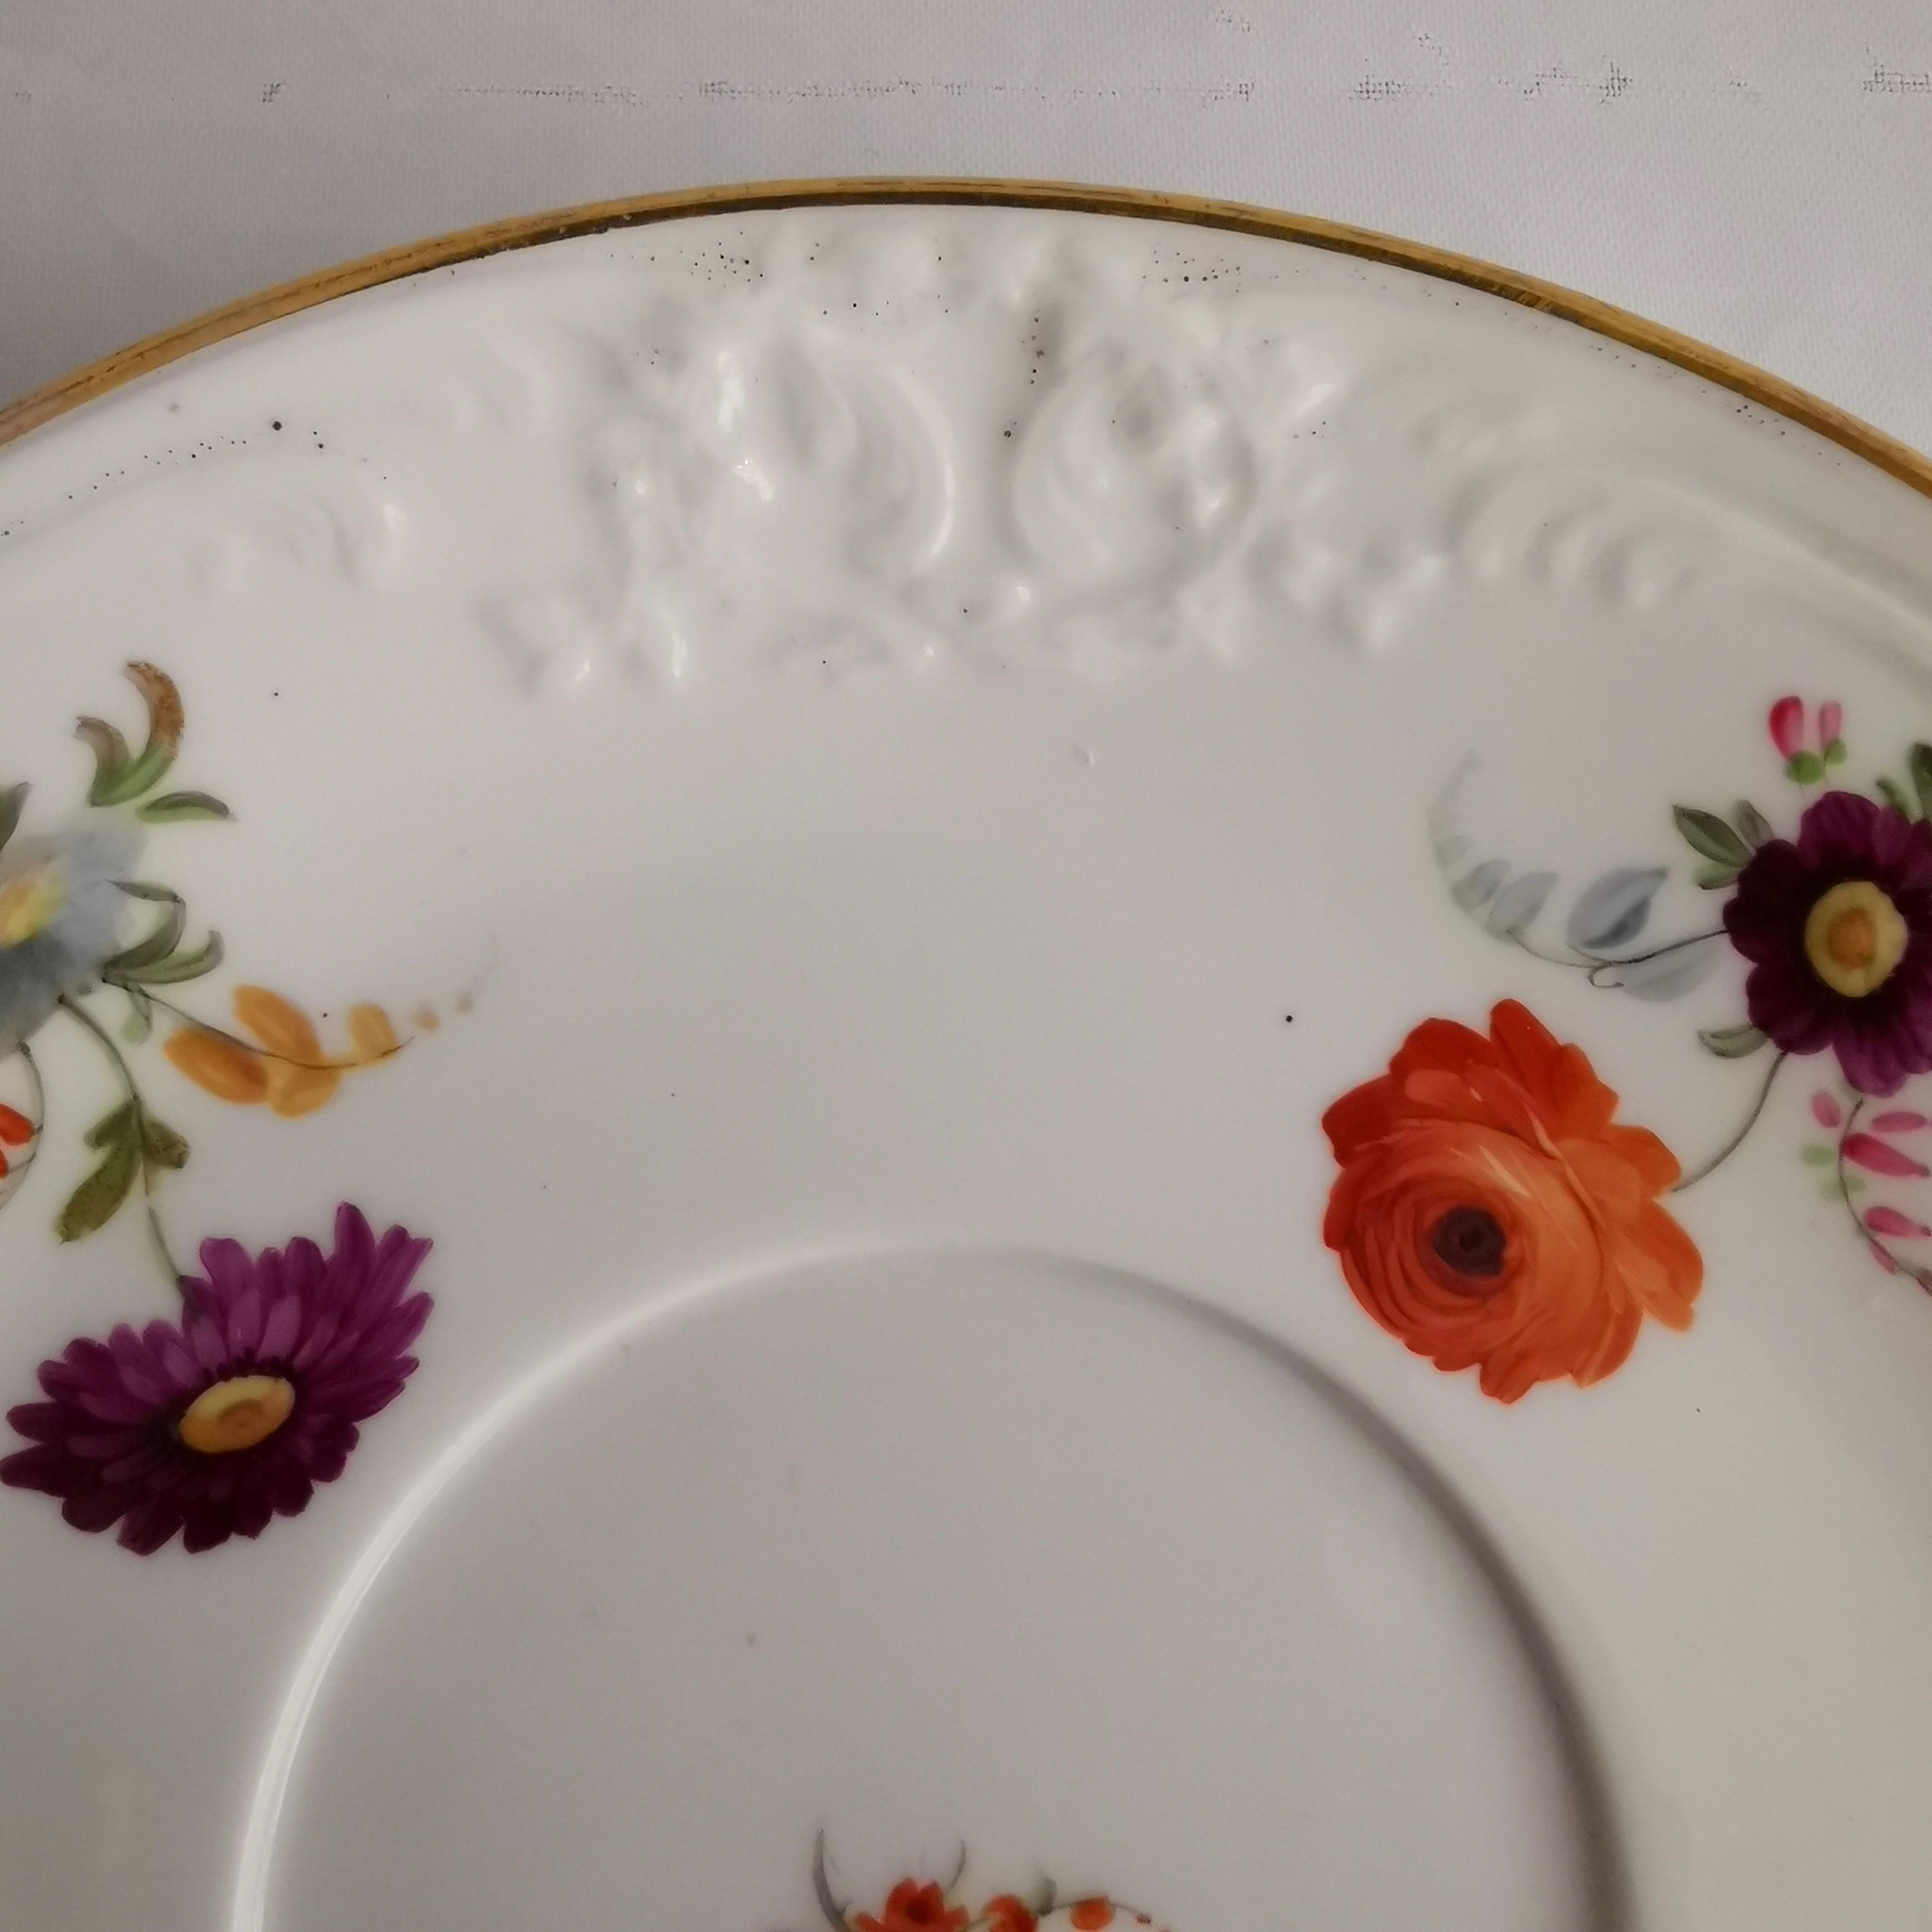 Davenport Porcelain Teacup, White with Hand Painted Flowers, circa 1820 4